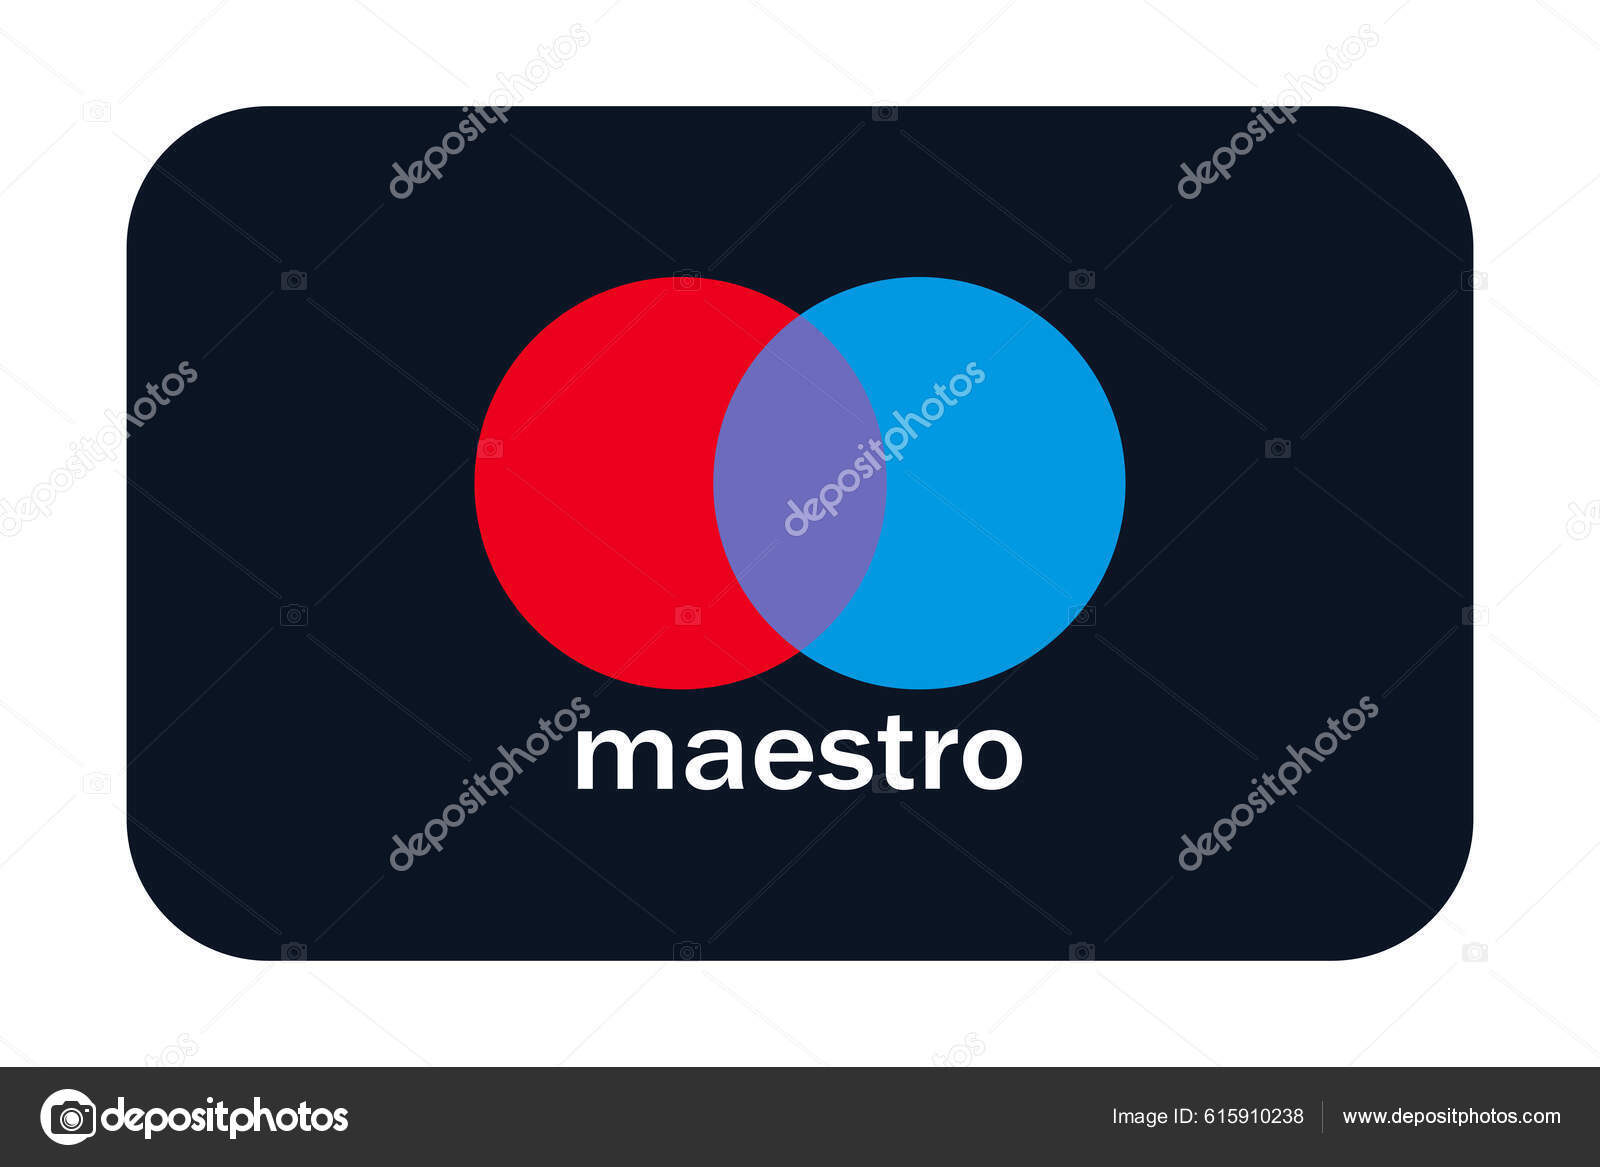 What's a Maestro card? How is it different from Mastercard? - N26